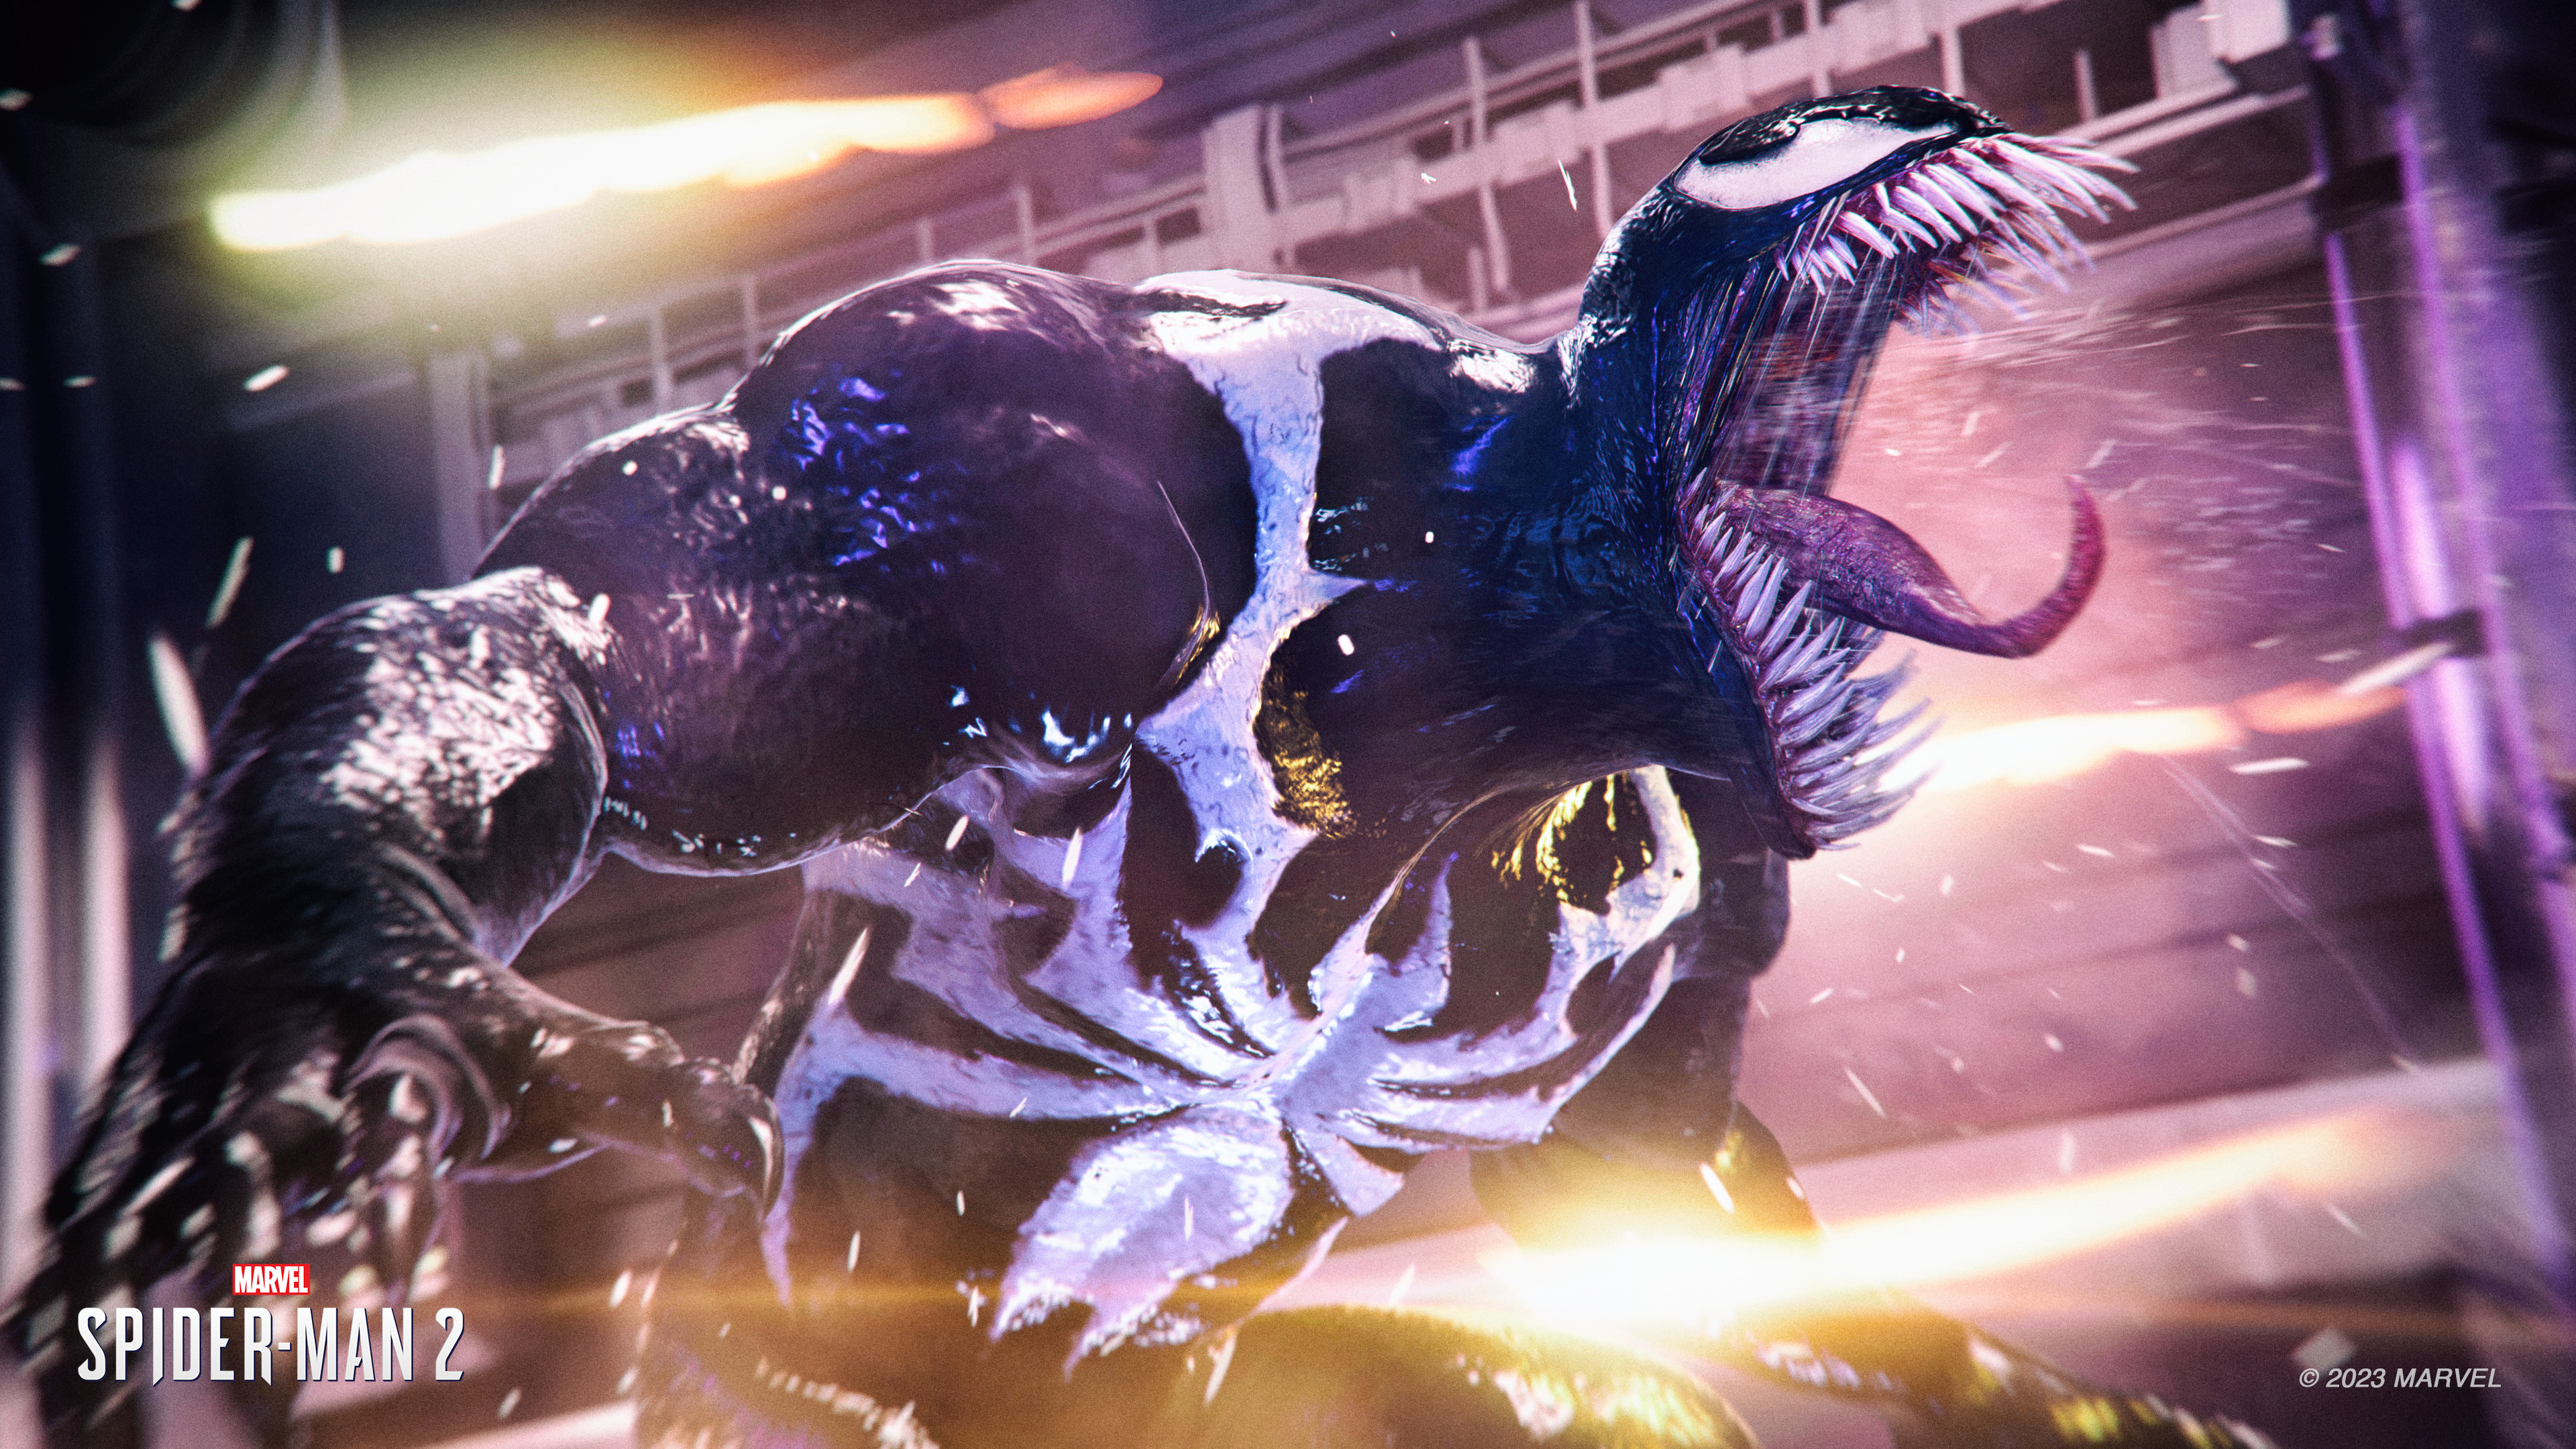 Venom screams and spittle flies out in Marvel's Spider-Man 2.